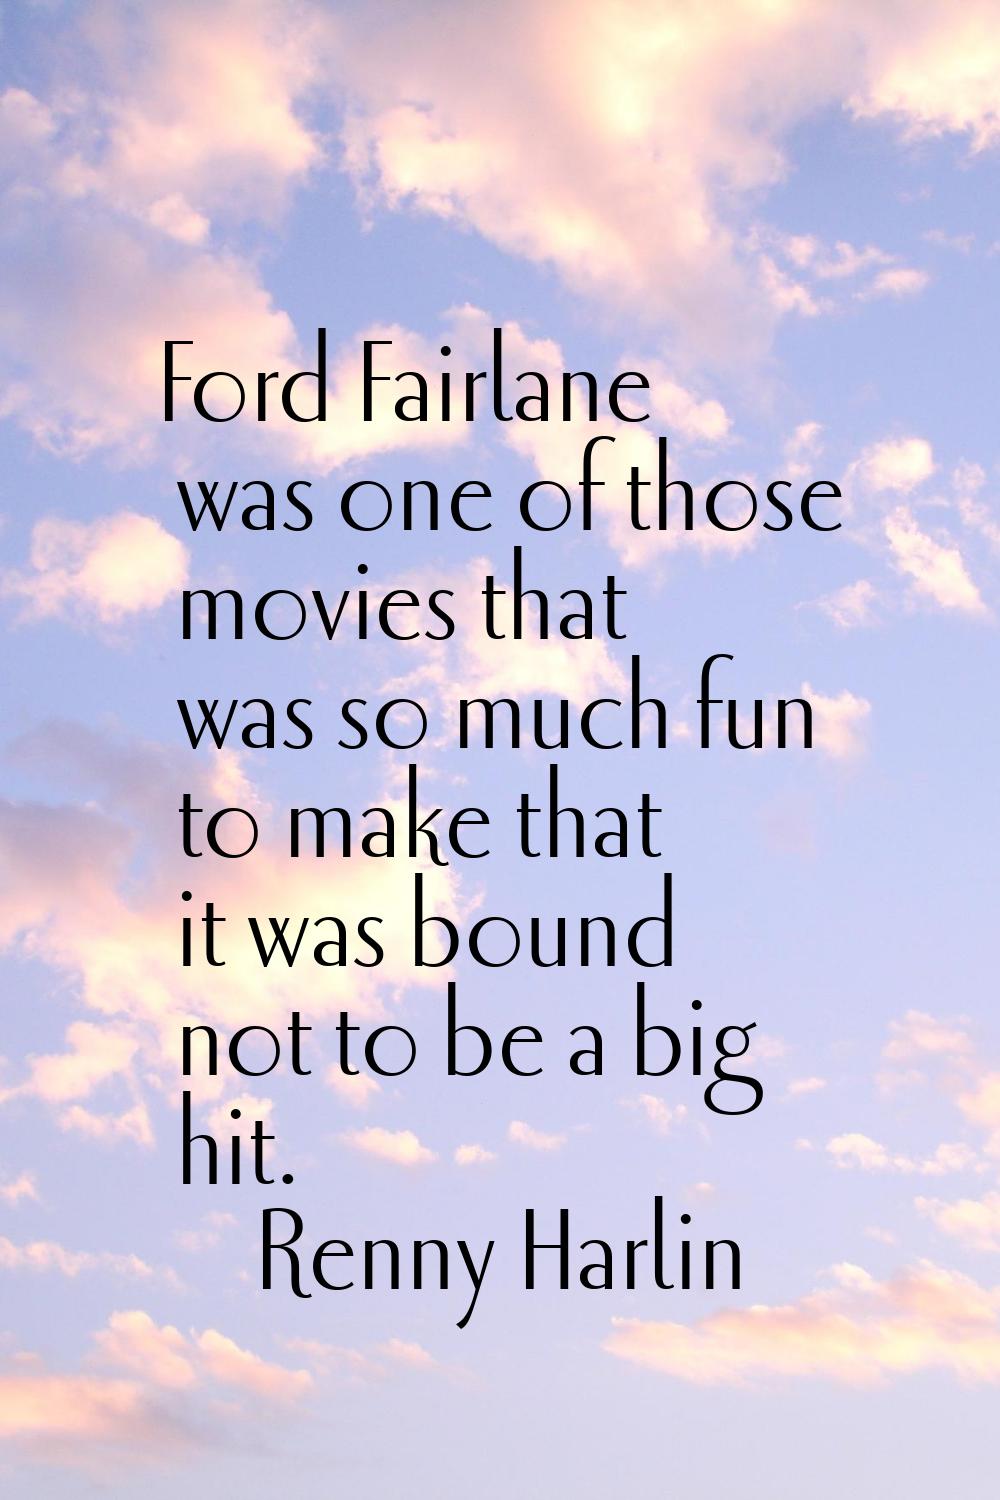 Ford Fairlane was one of those movies that was so much fun to make that it was bound not to be a bi